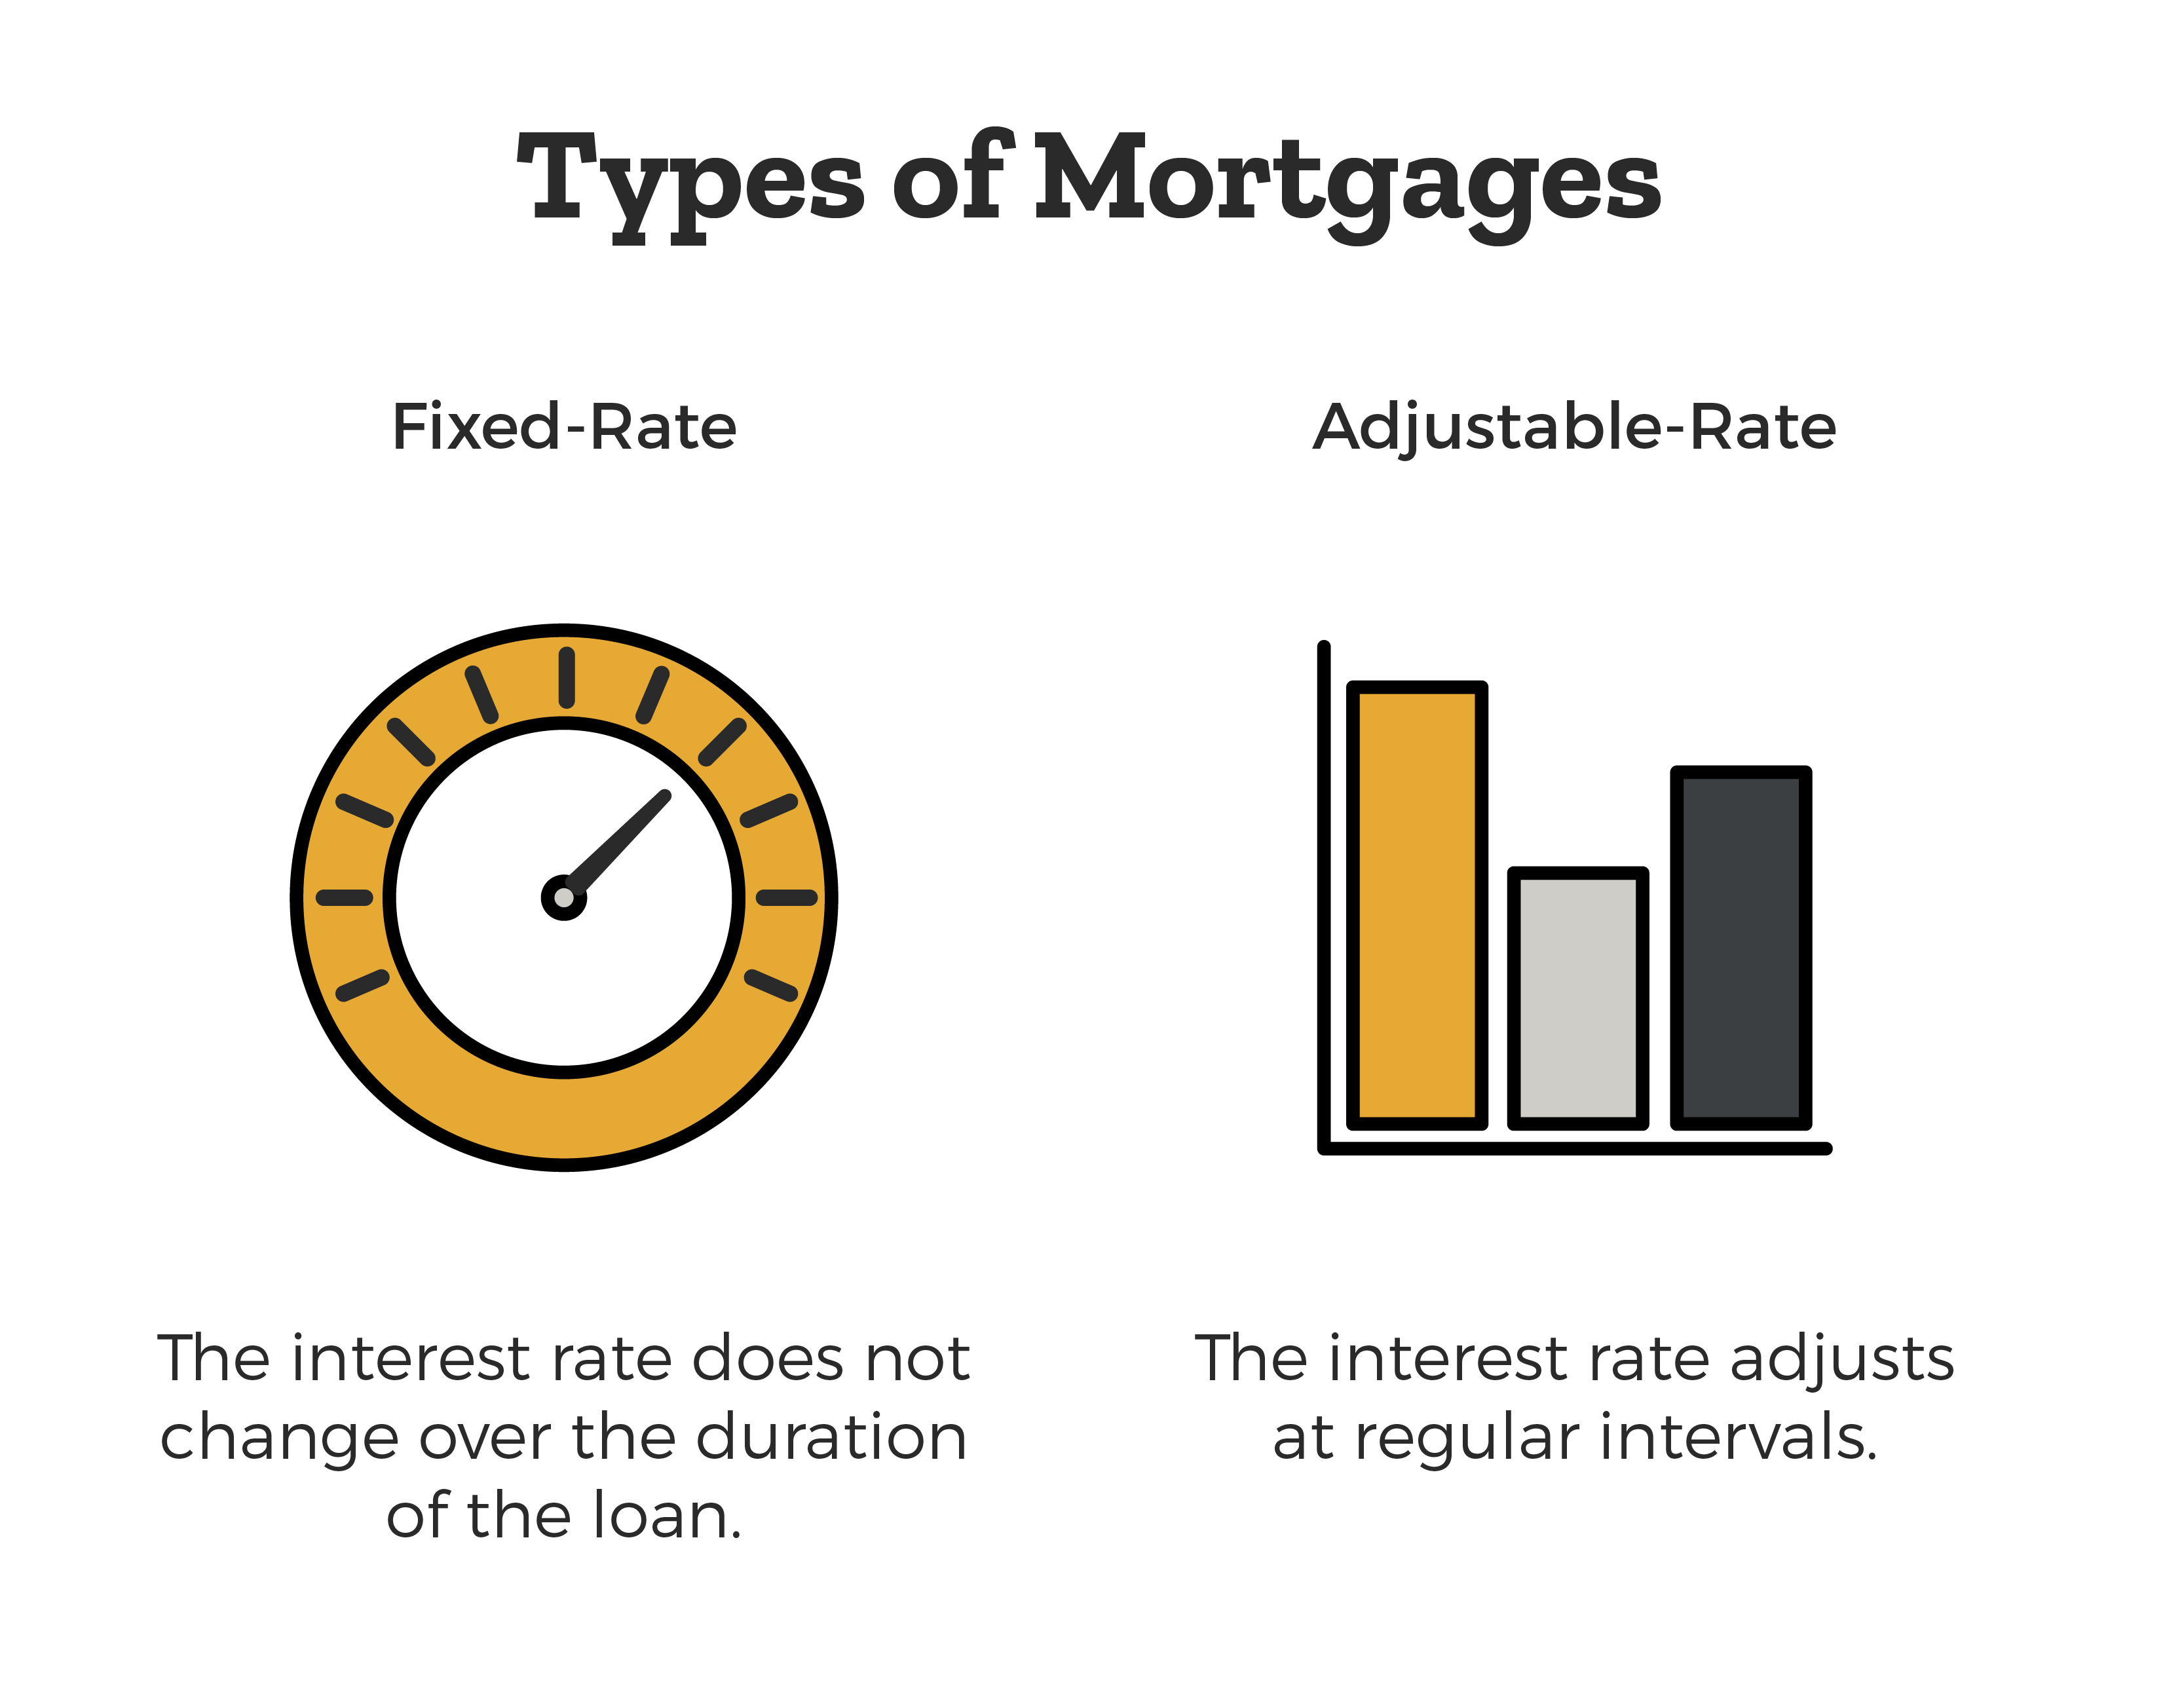 Types of Mortgages: Fixed Rate, which is the interest rate does not change over the duration of the loans. And Adjustable rate, which is the interest rate adjusts at regular intervals.